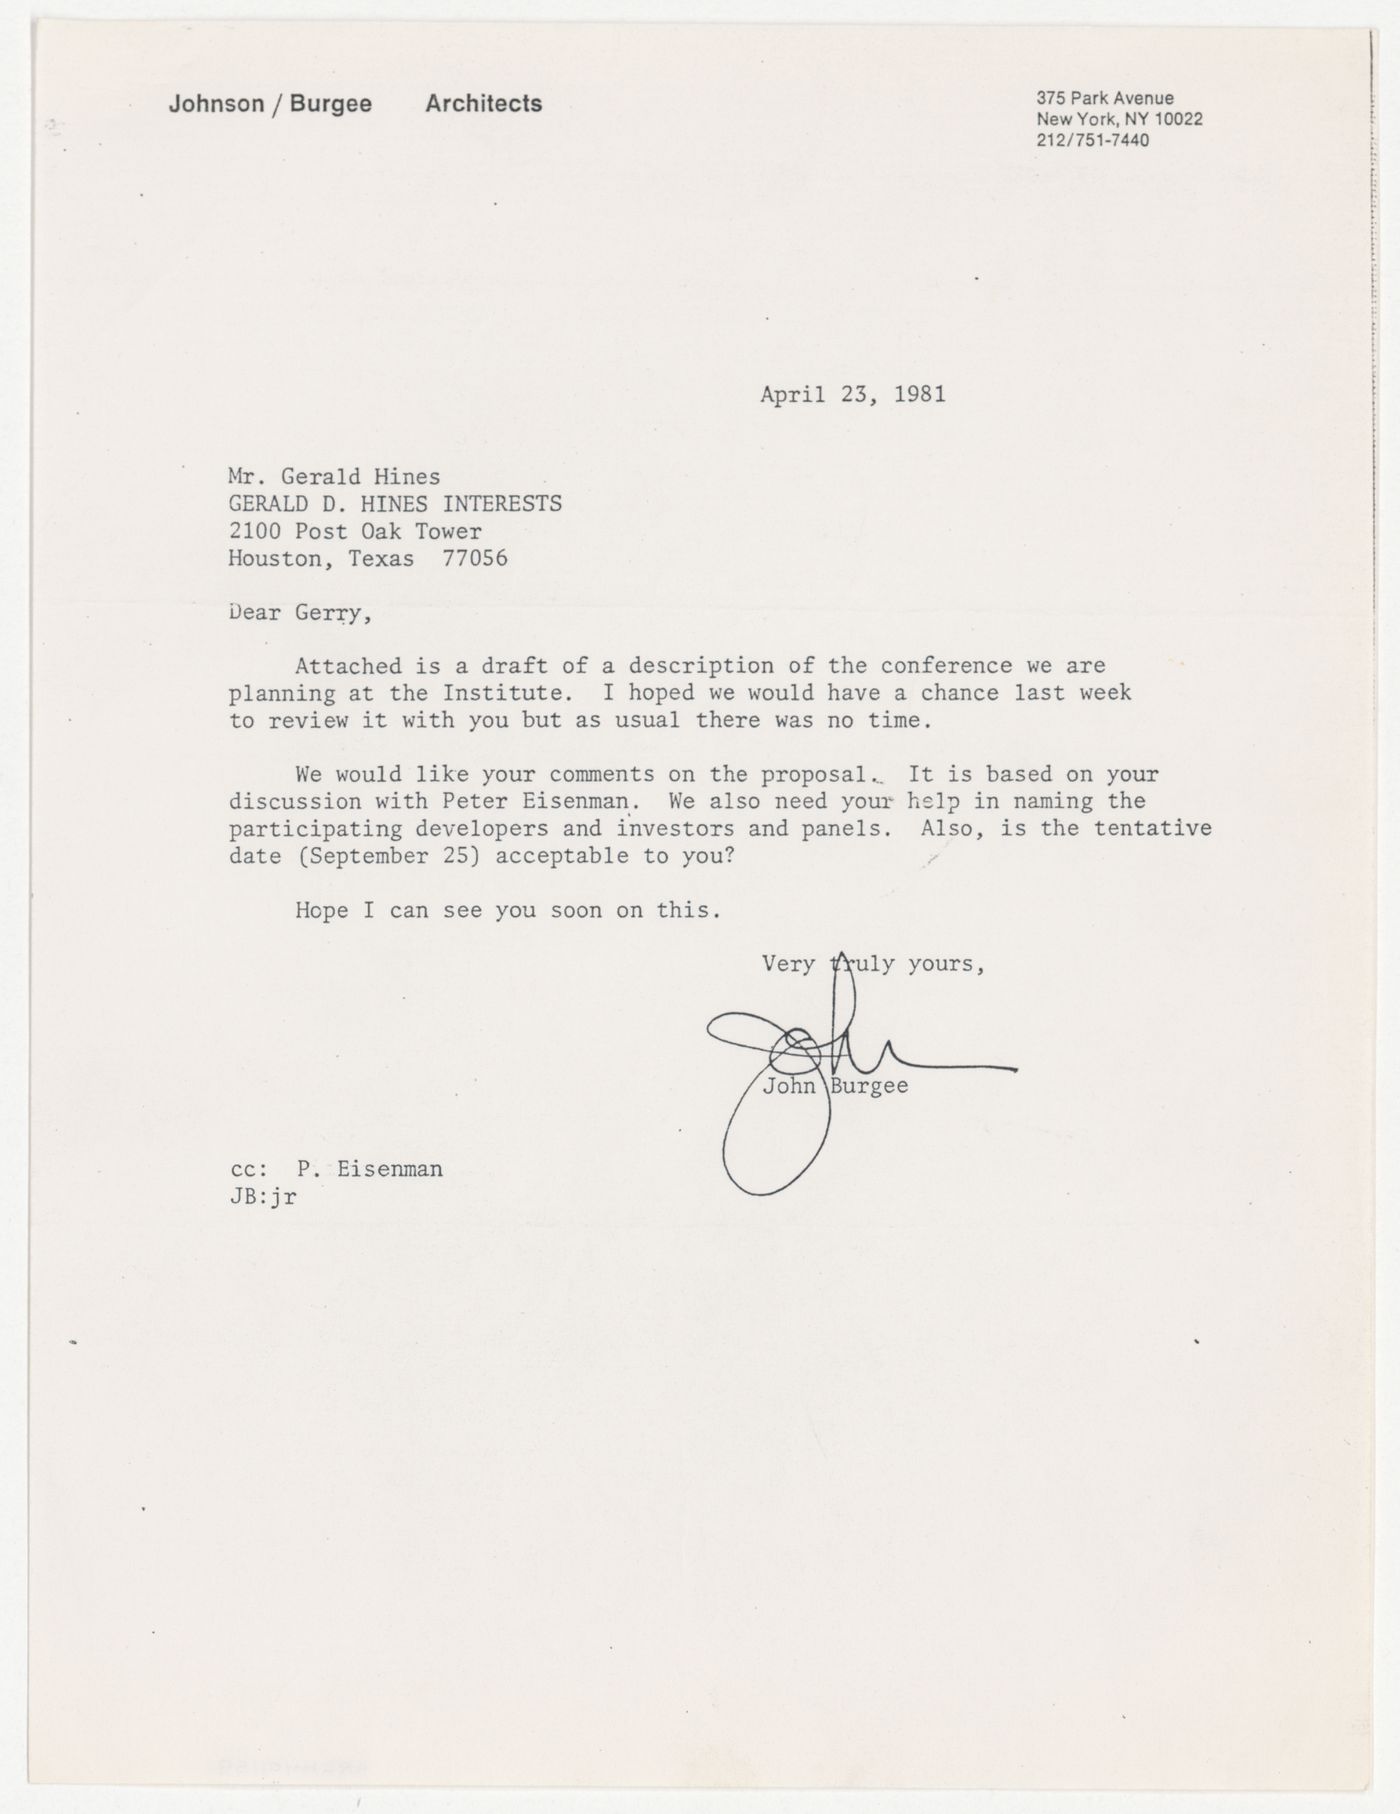 Letter from John Burgee to Gerald Hines about planning a conference at IAUS